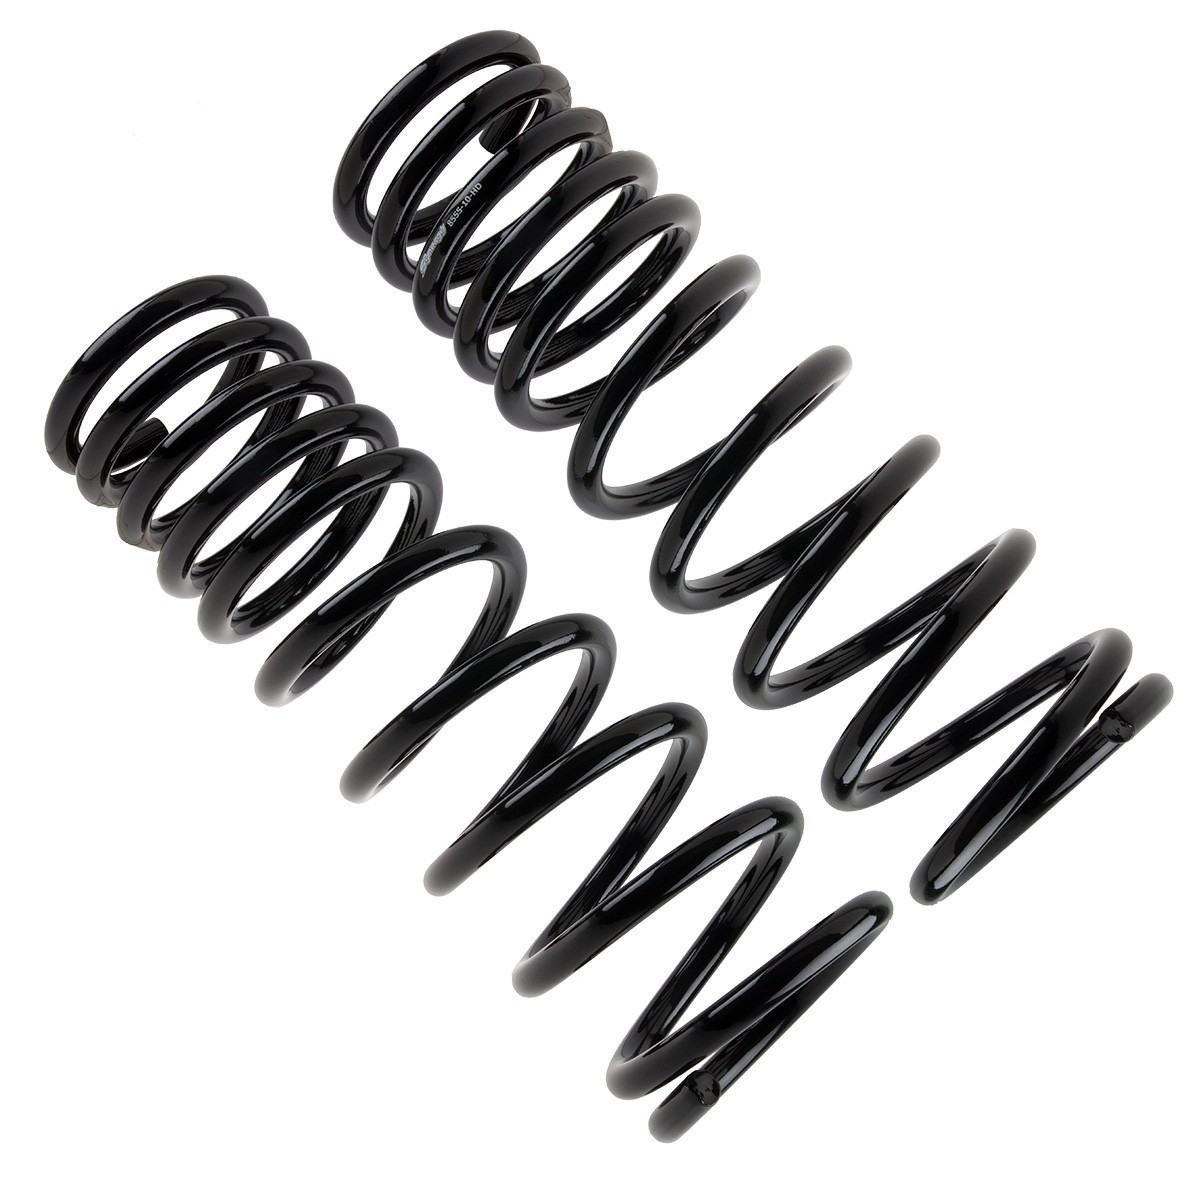 Synergy 1994-2013 Dodge Ram 2500 / 3500 Front Lift Coil Springs